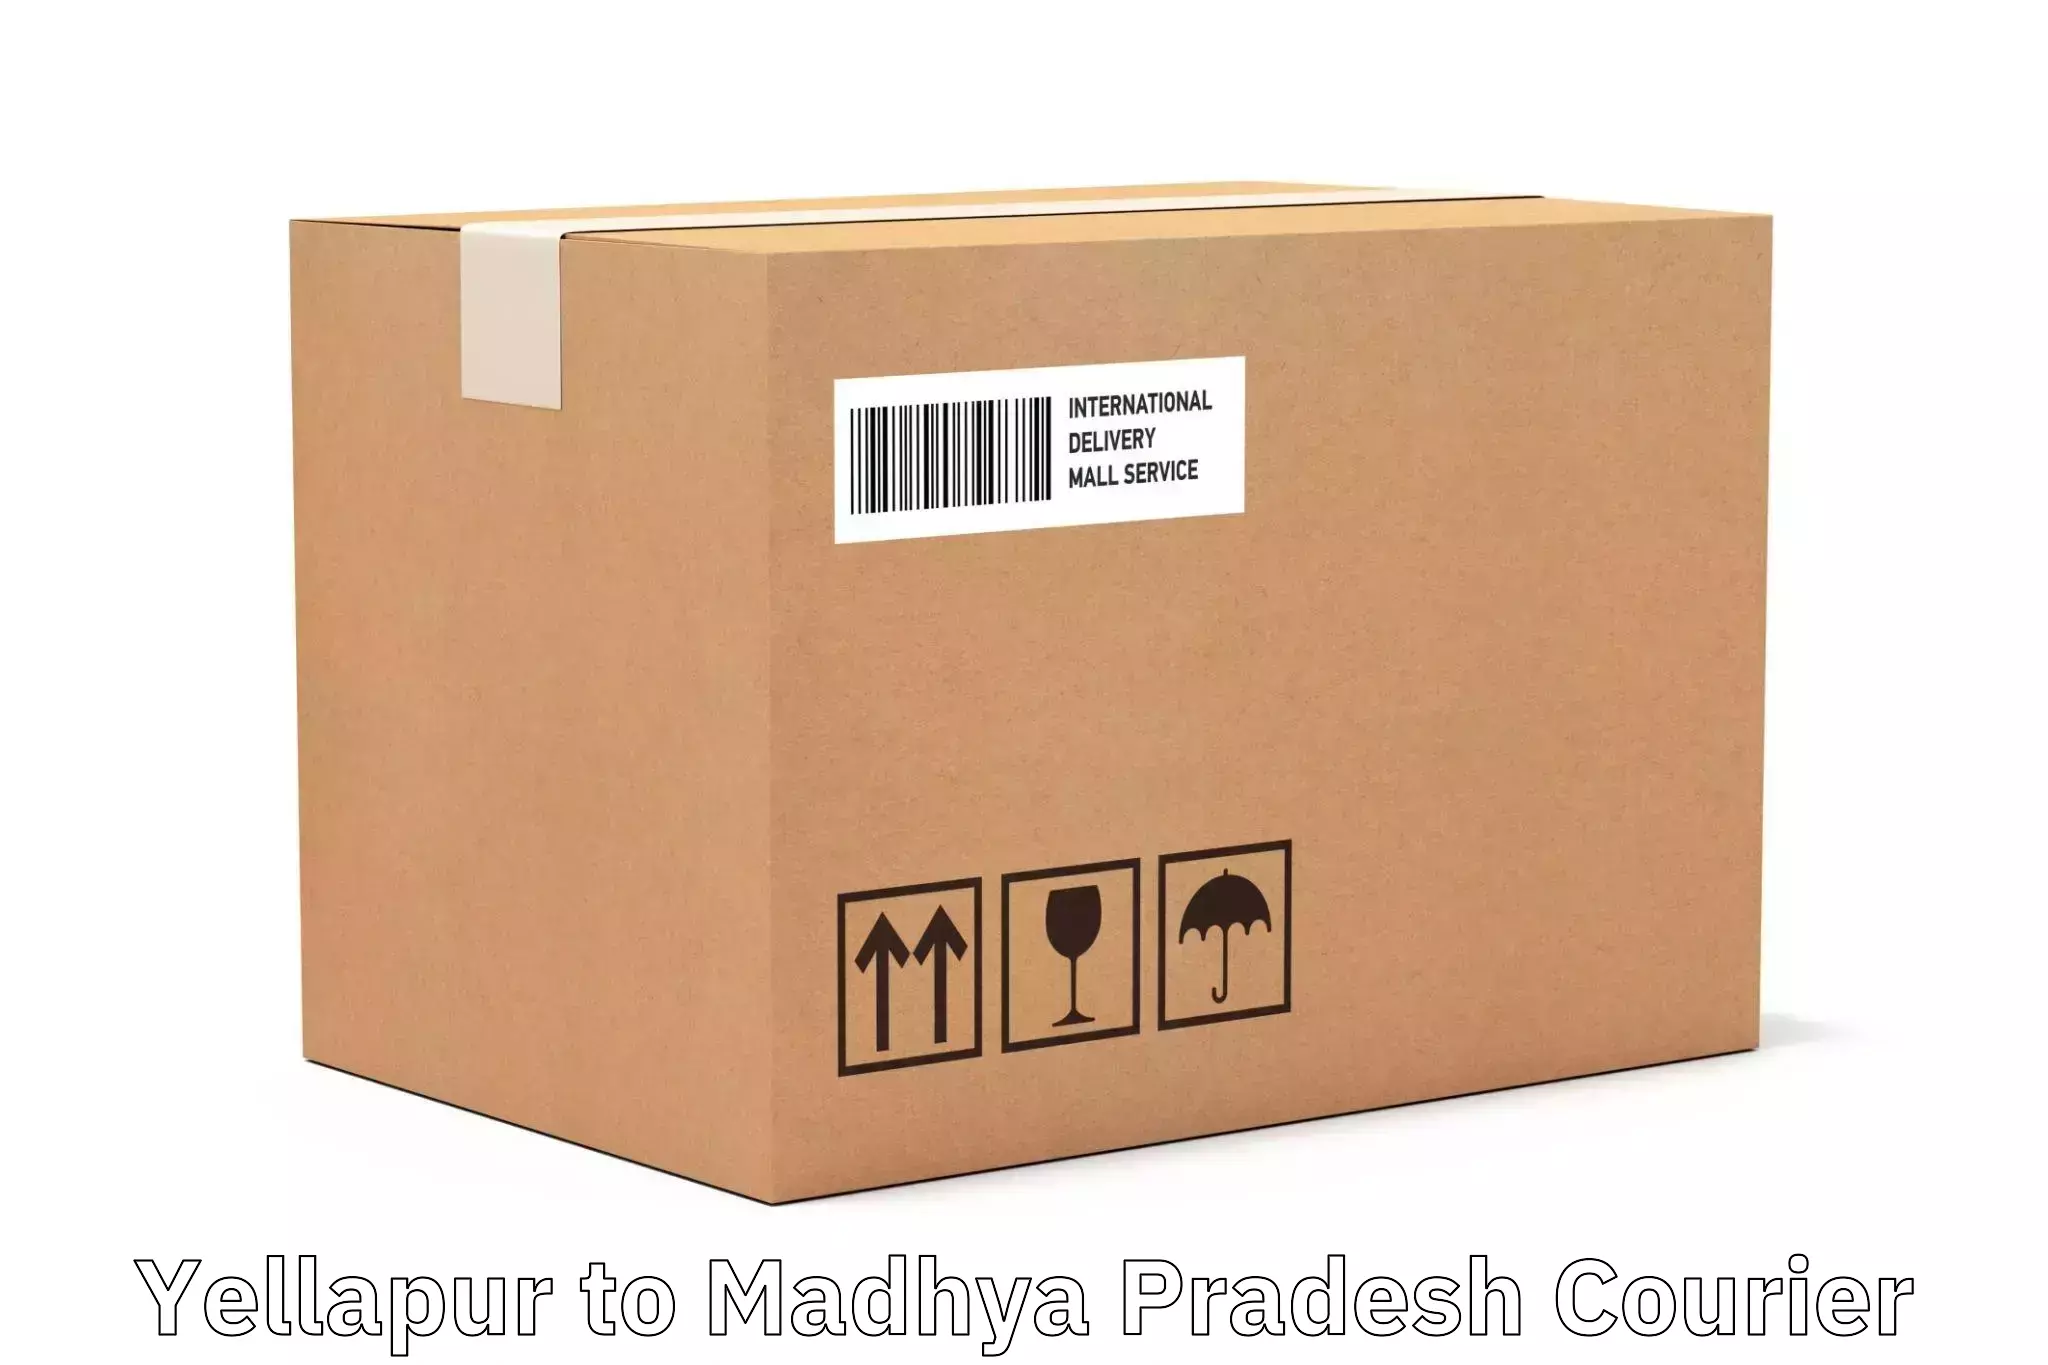 Package delivery network Yellapur to Maheshwar